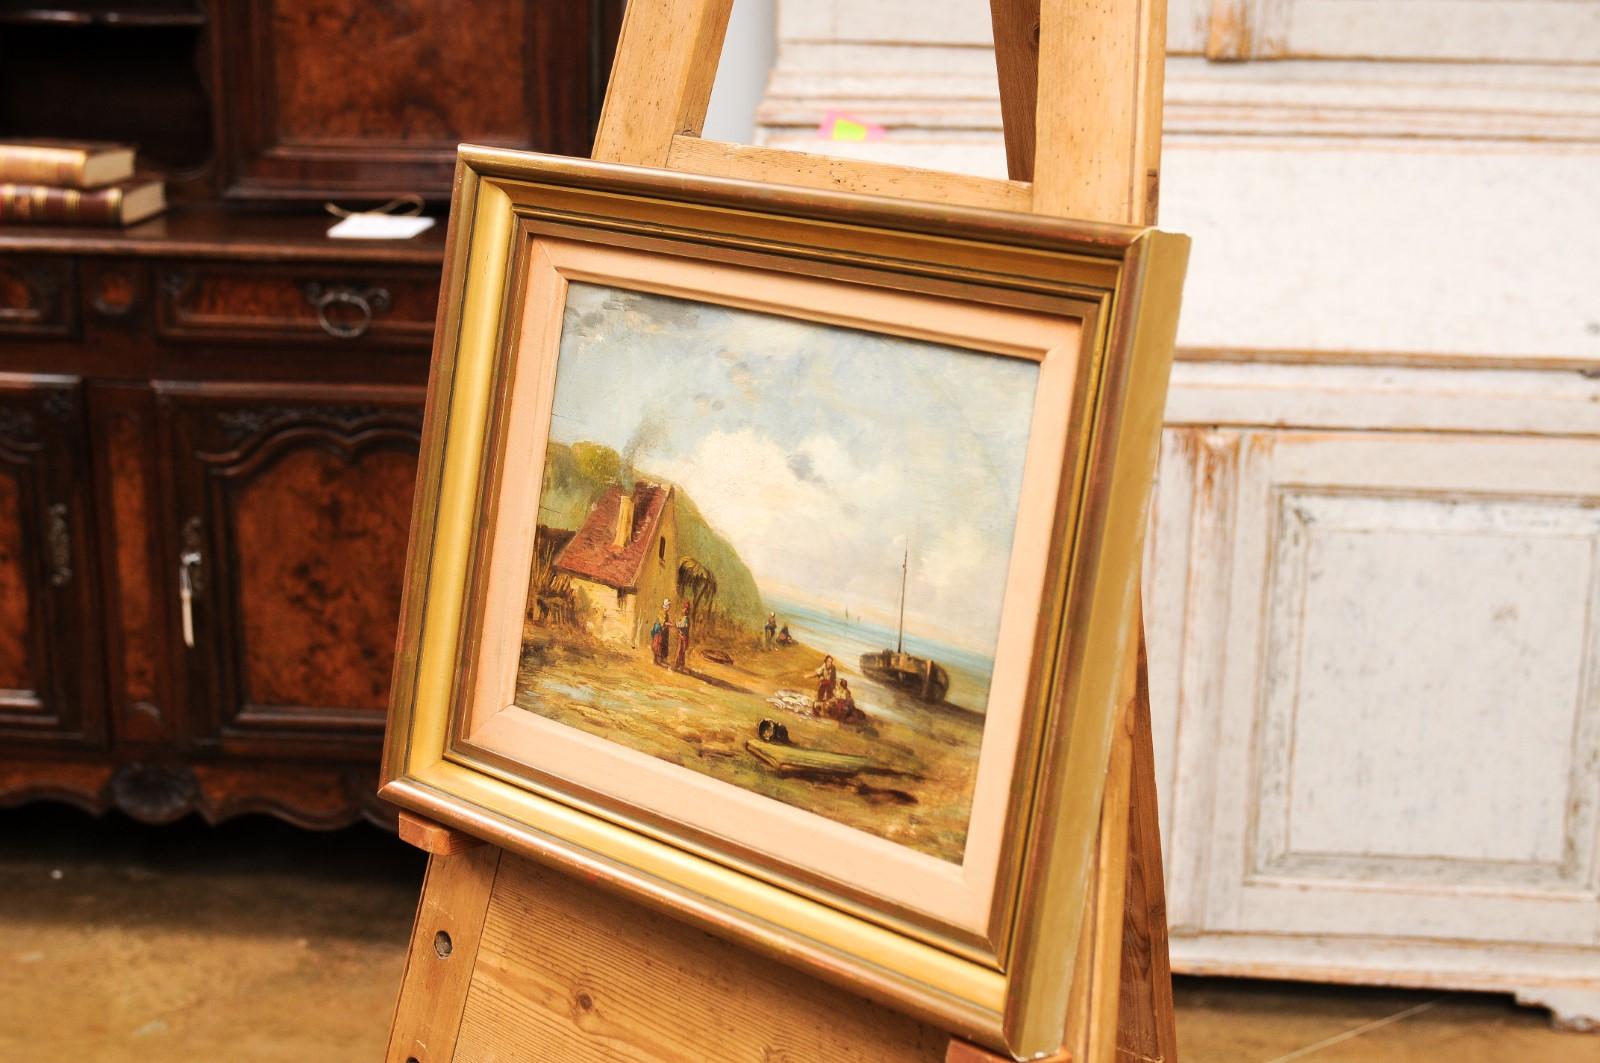 French 19th Century Framed Oil On Panel Painting Depicting a Village by the Sea For Sale 3